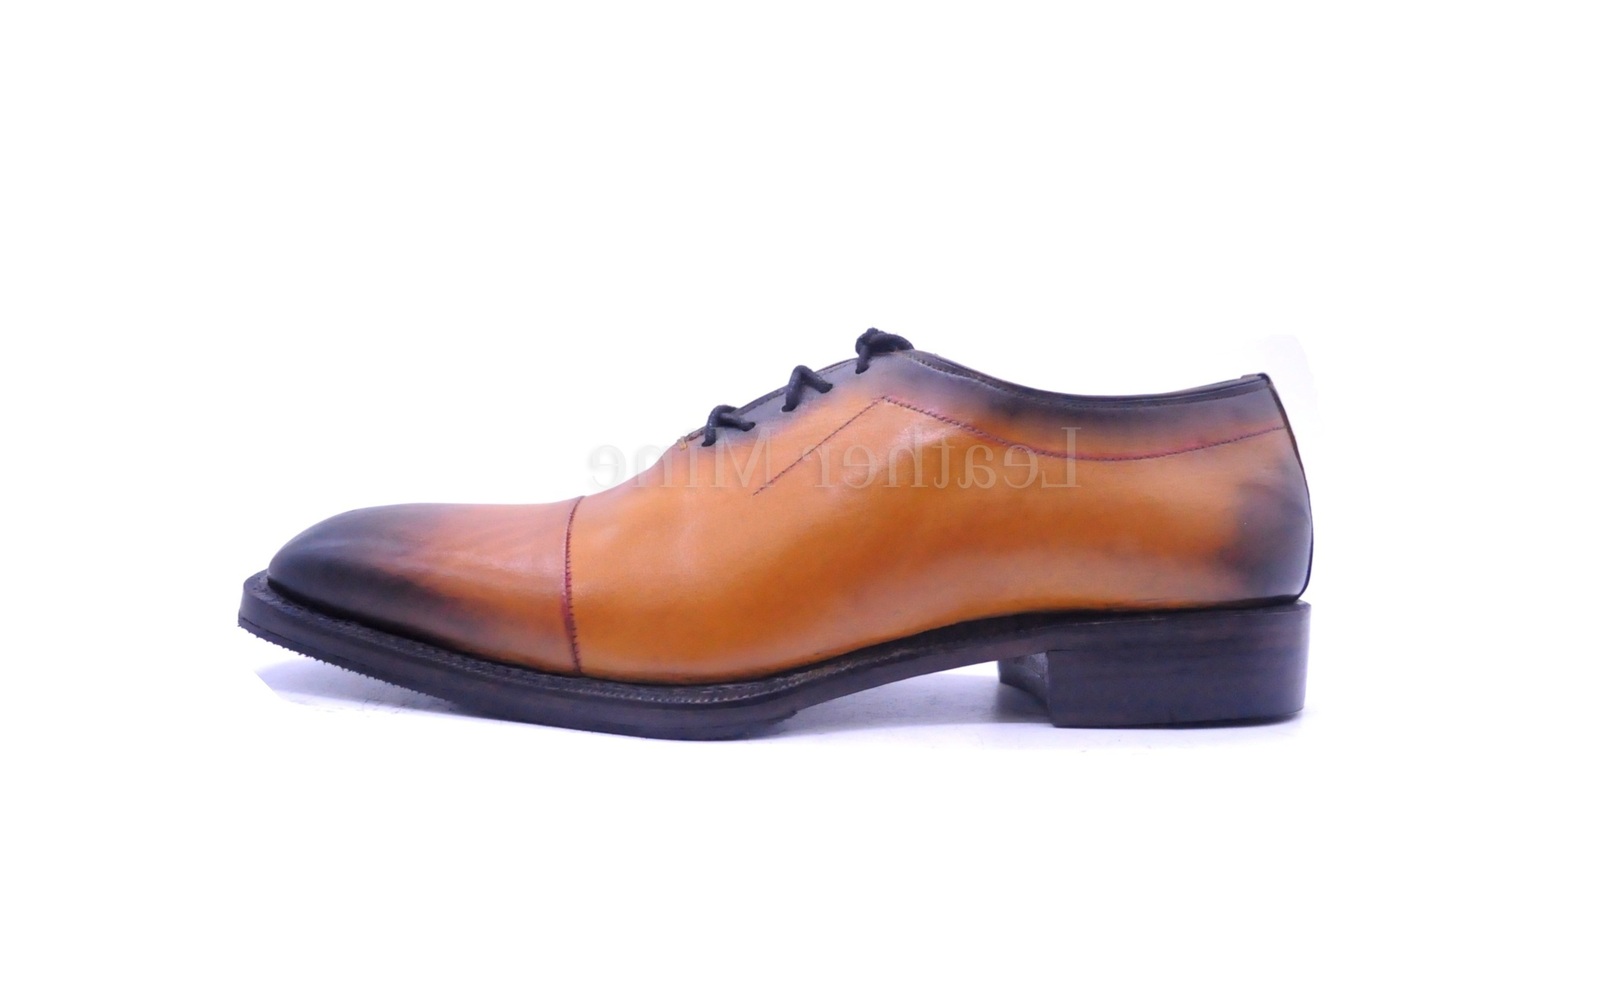 Tan Patina Oxfords Dress Shoes For Men, Genuine Leather Custom Shoes